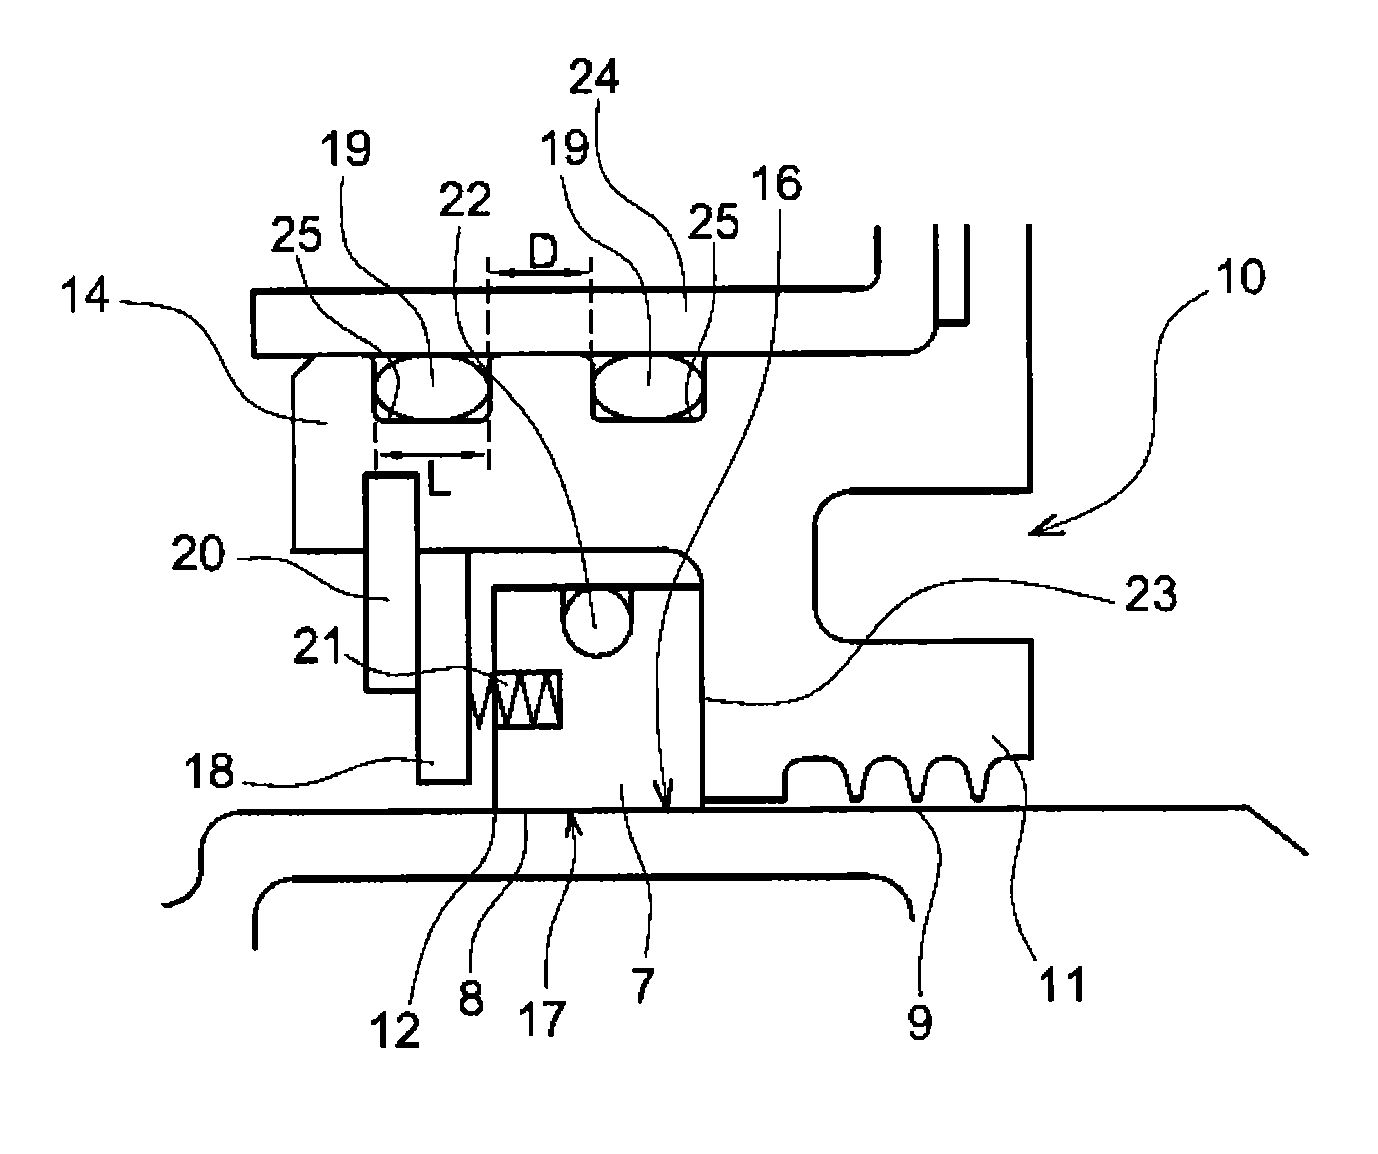 Gasket device for the bearing of a turbomachine, comprising two elastic seals